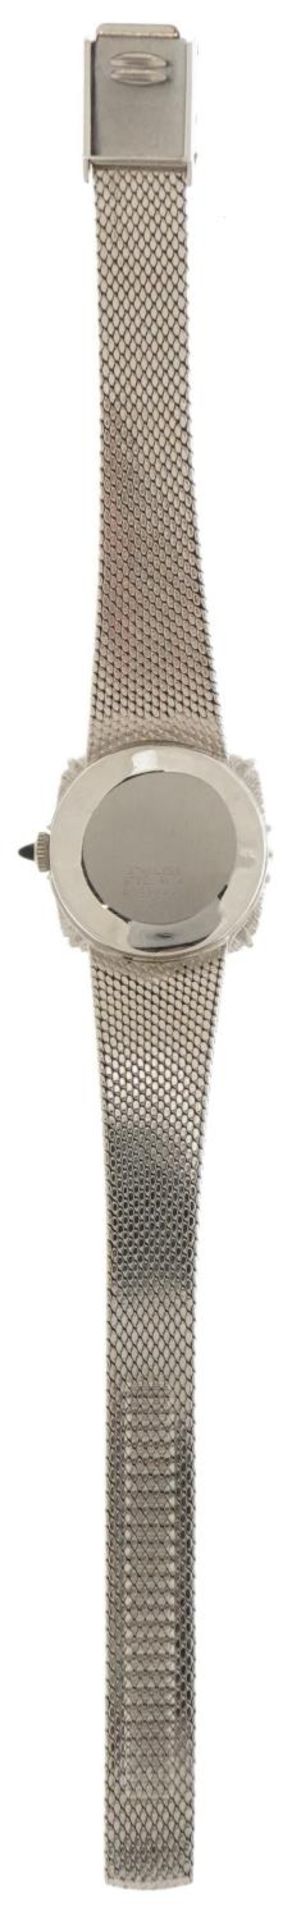 Raymond Weil, ladies stainless steel automatic wristwatch with clear stone bezel, the case 25.5mm - Image 3 of 5